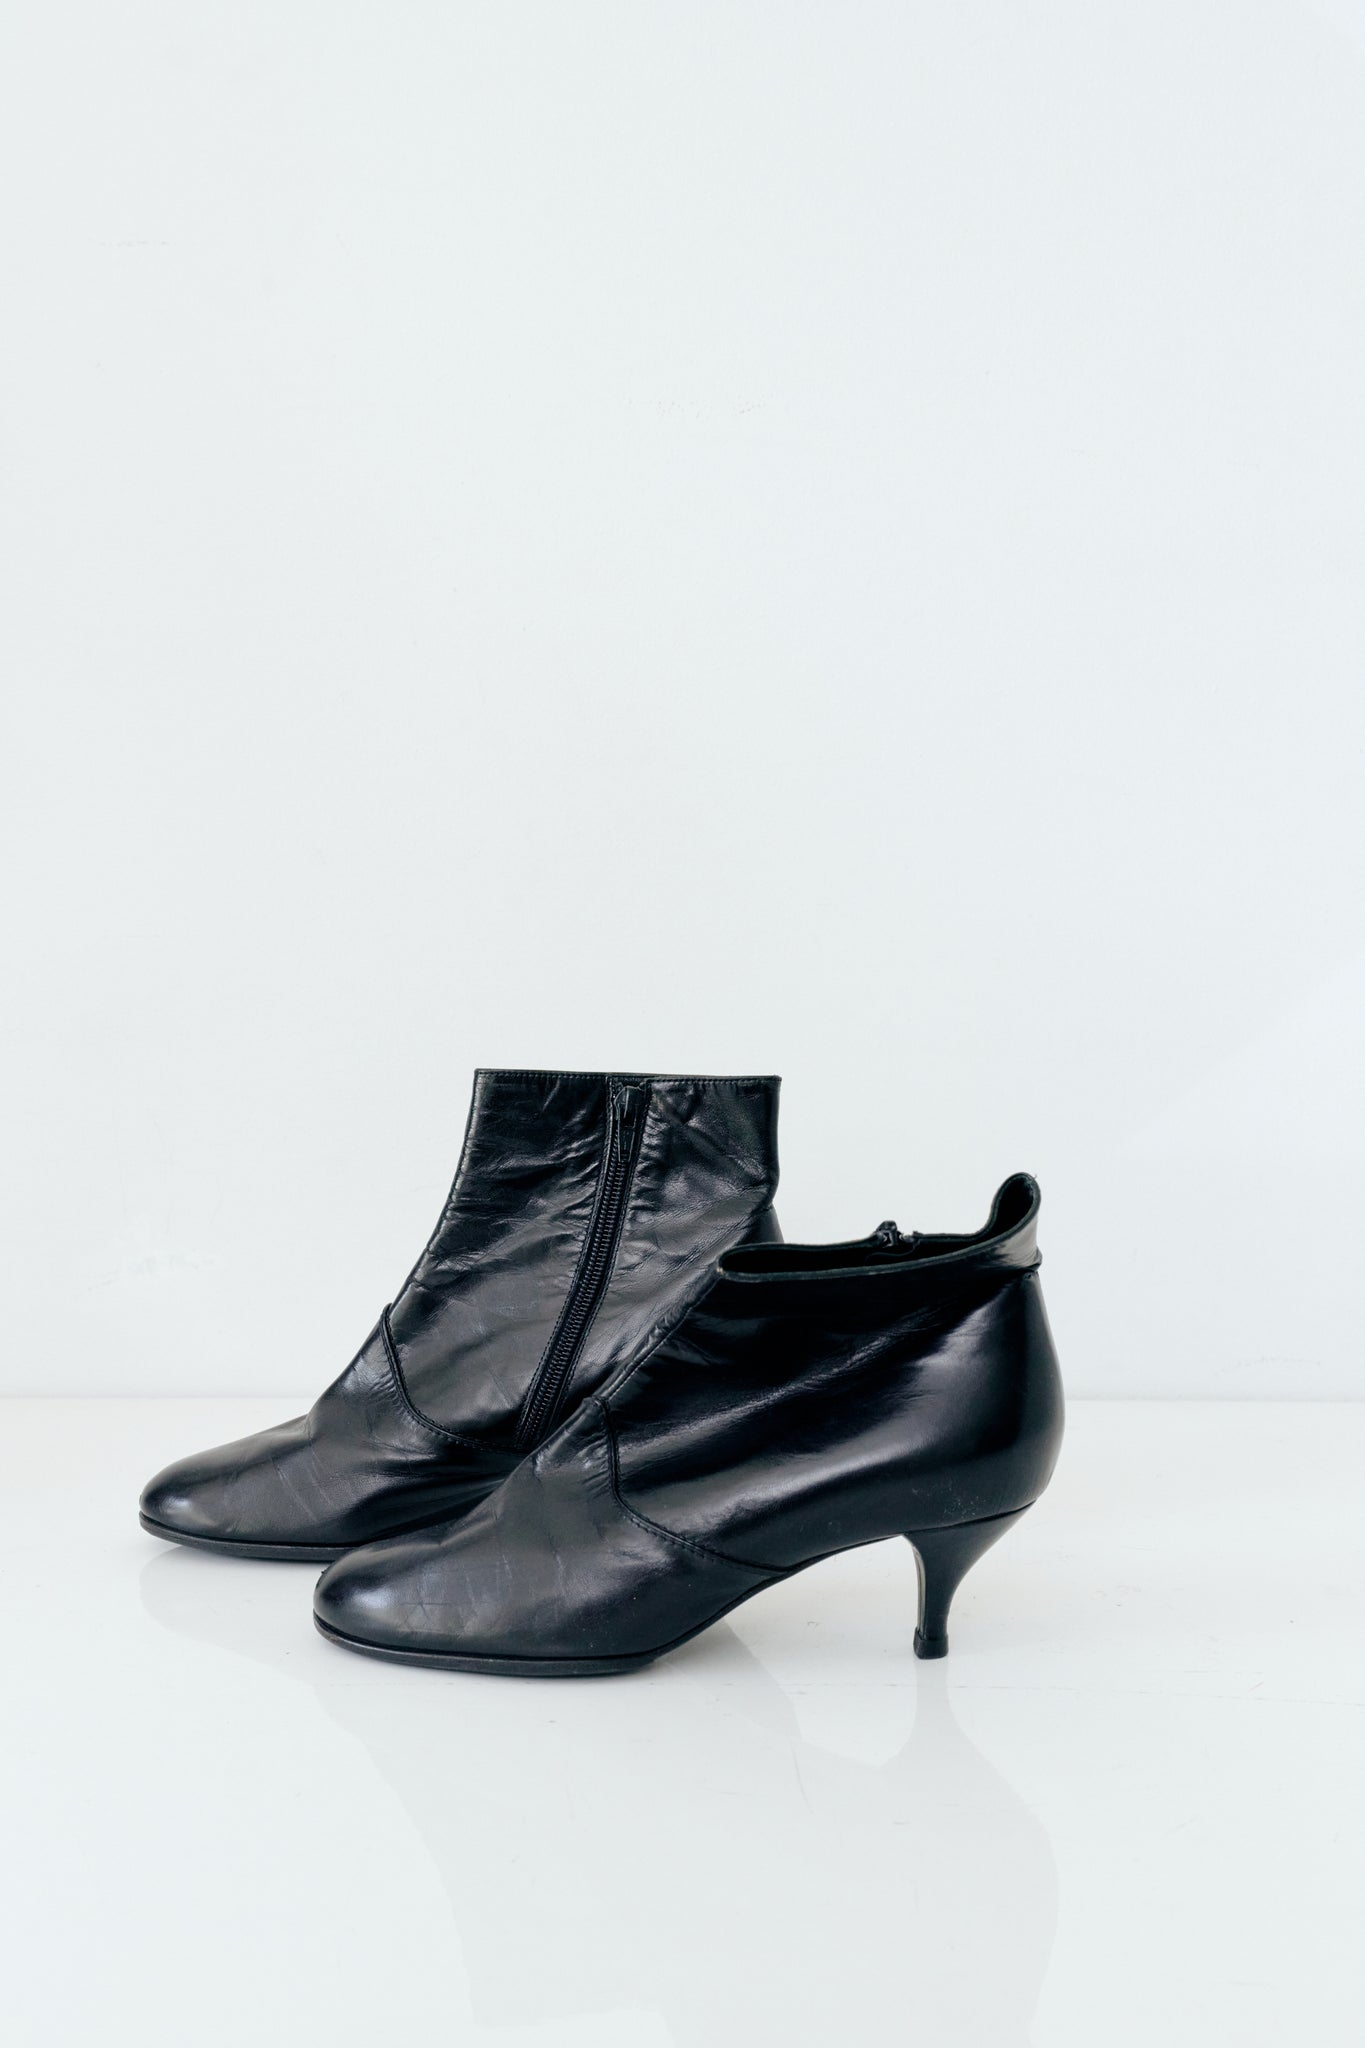 Marc Jacobs Black Leather Booties